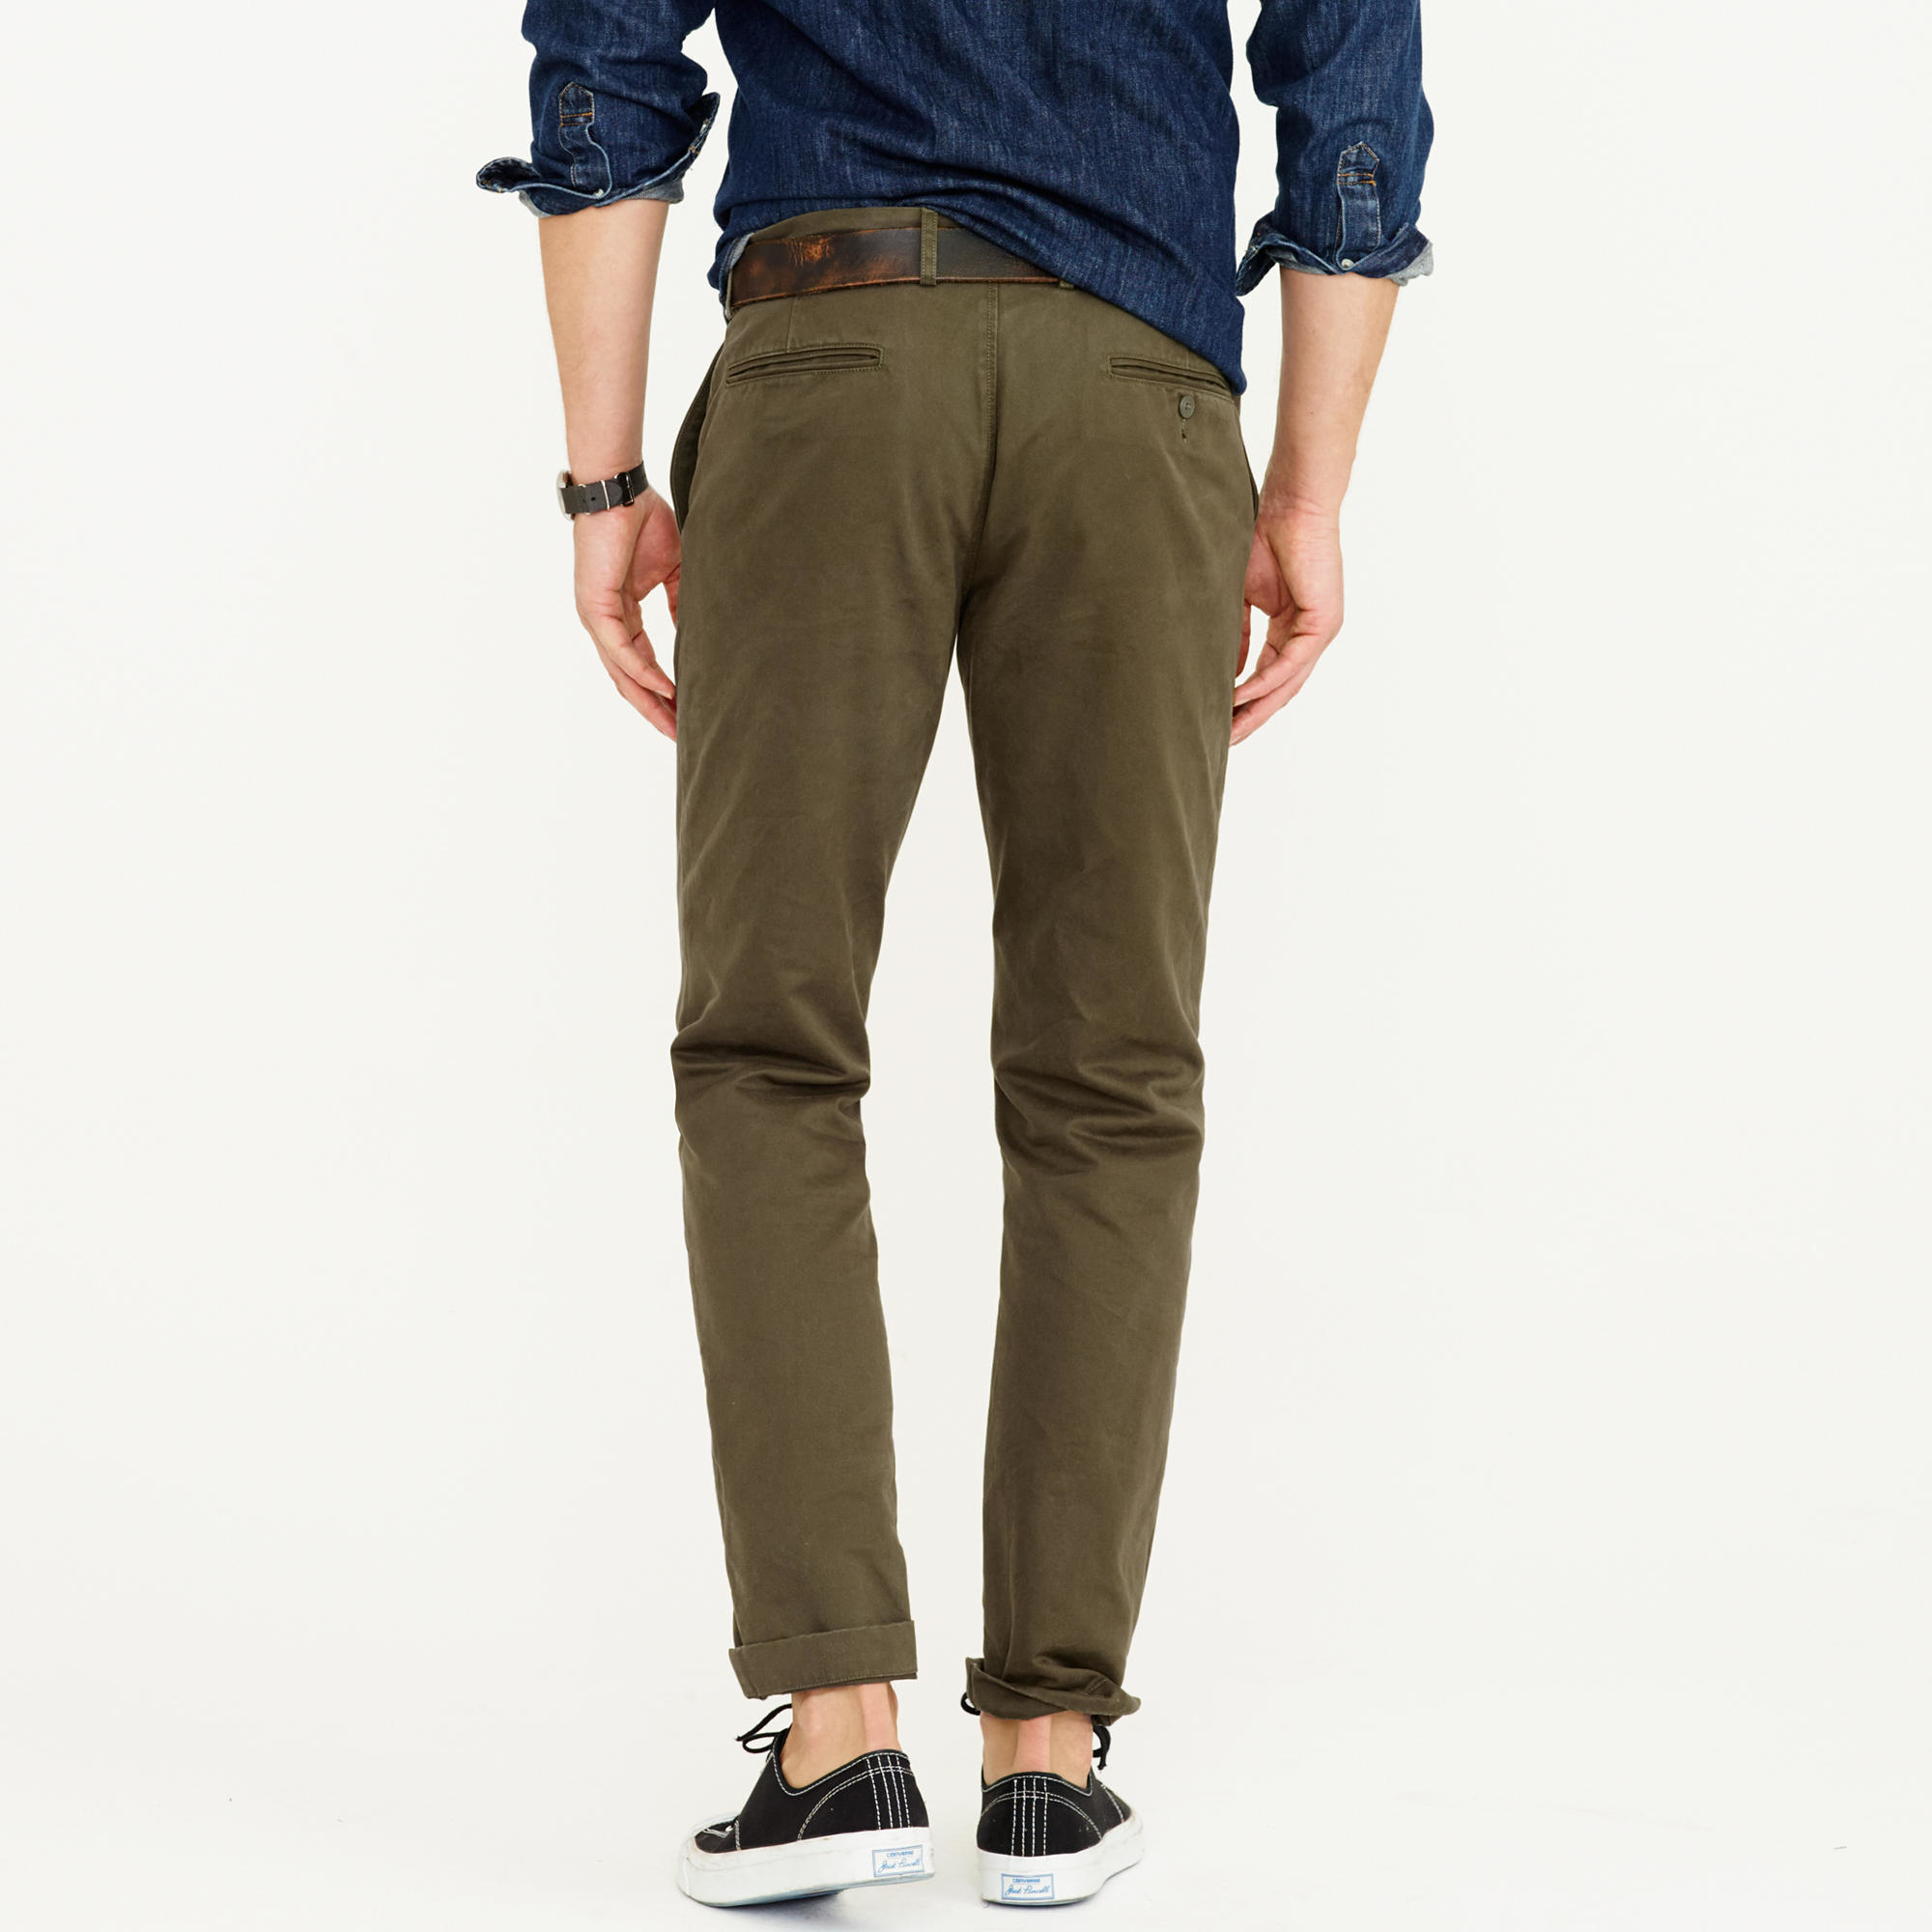 J.Crew Cotton Broken-in Chino In 770 Fit in Green for Men - Lyst